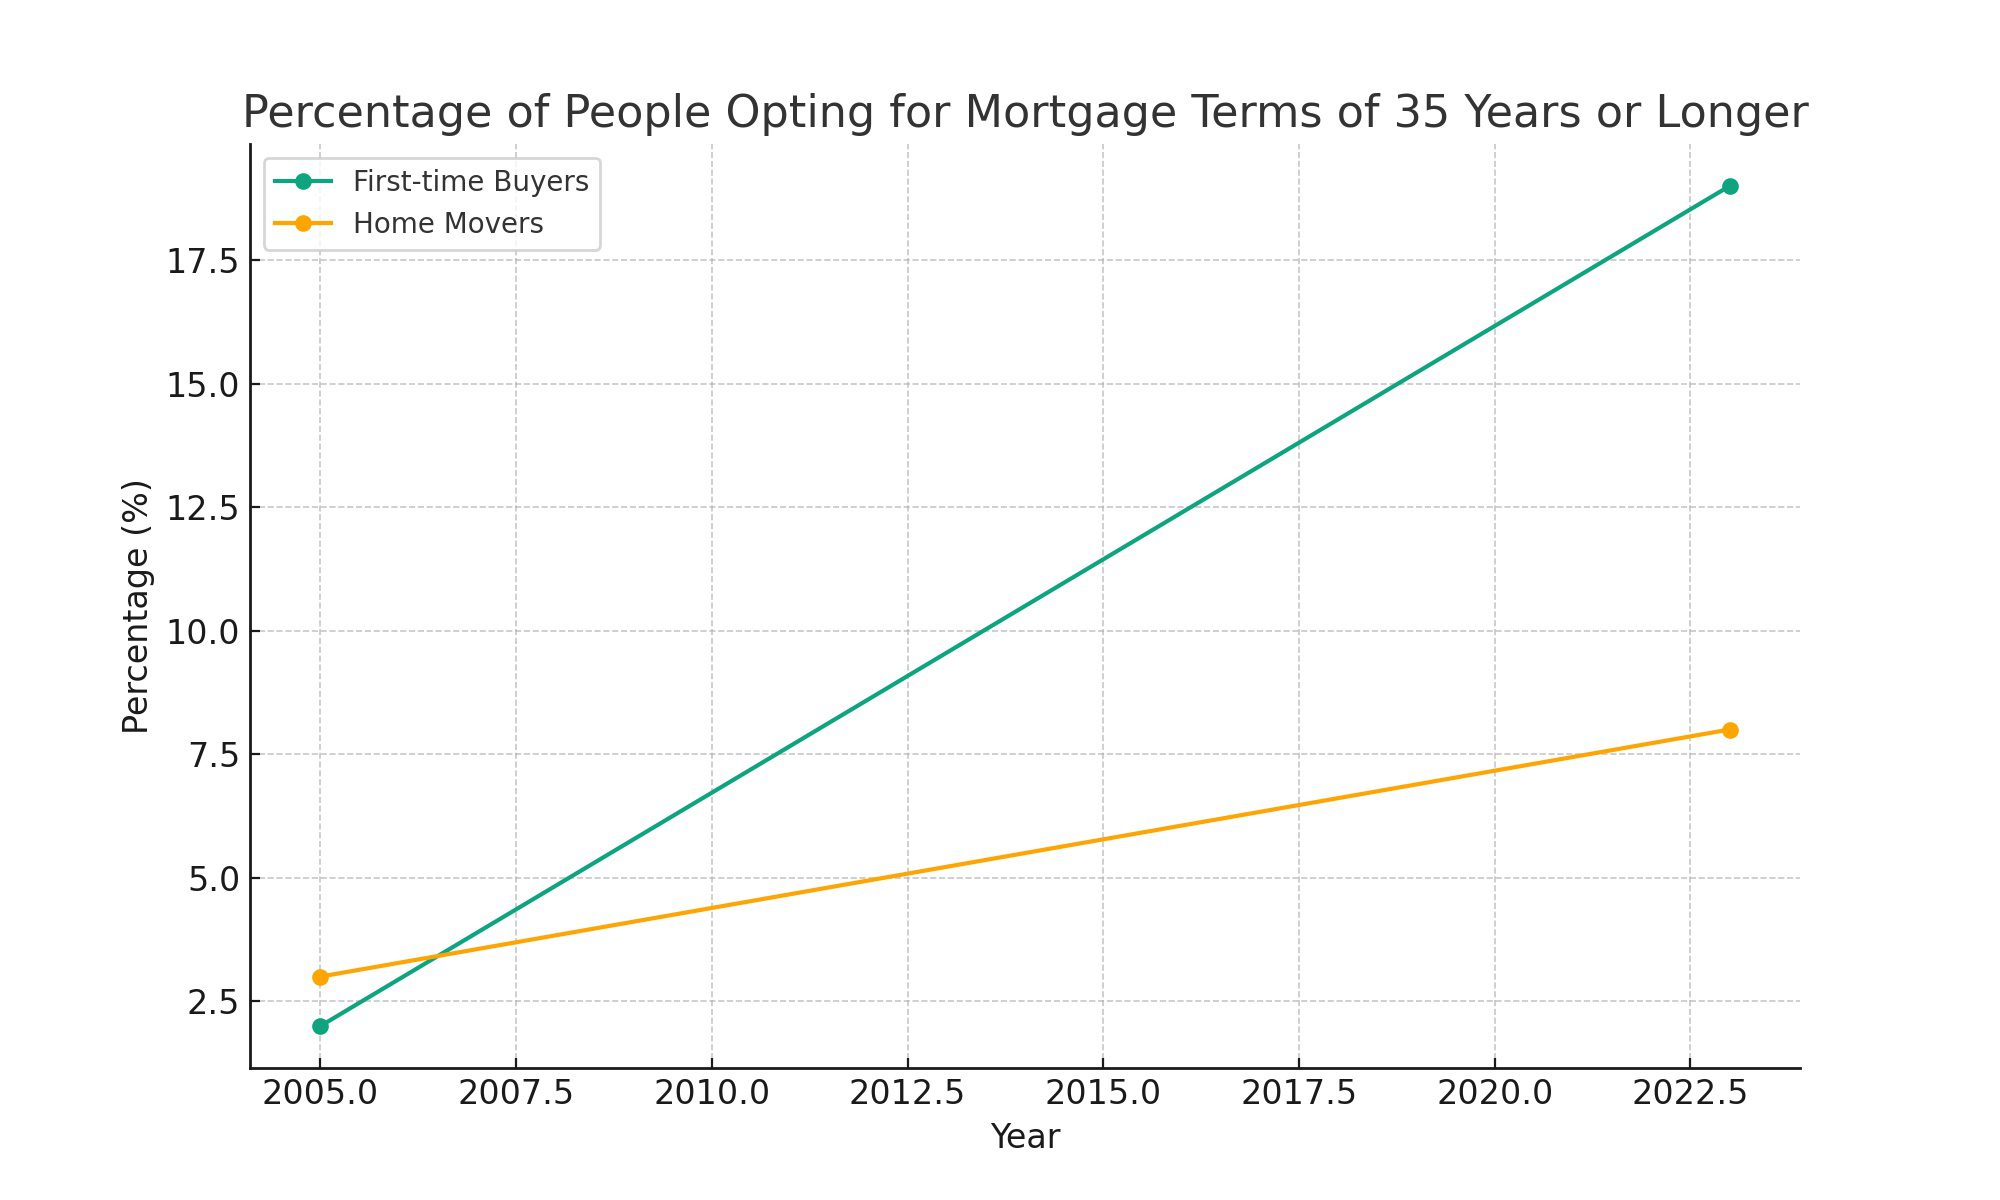 The percentage of people opting for 35 year to 40 year mortgage terms